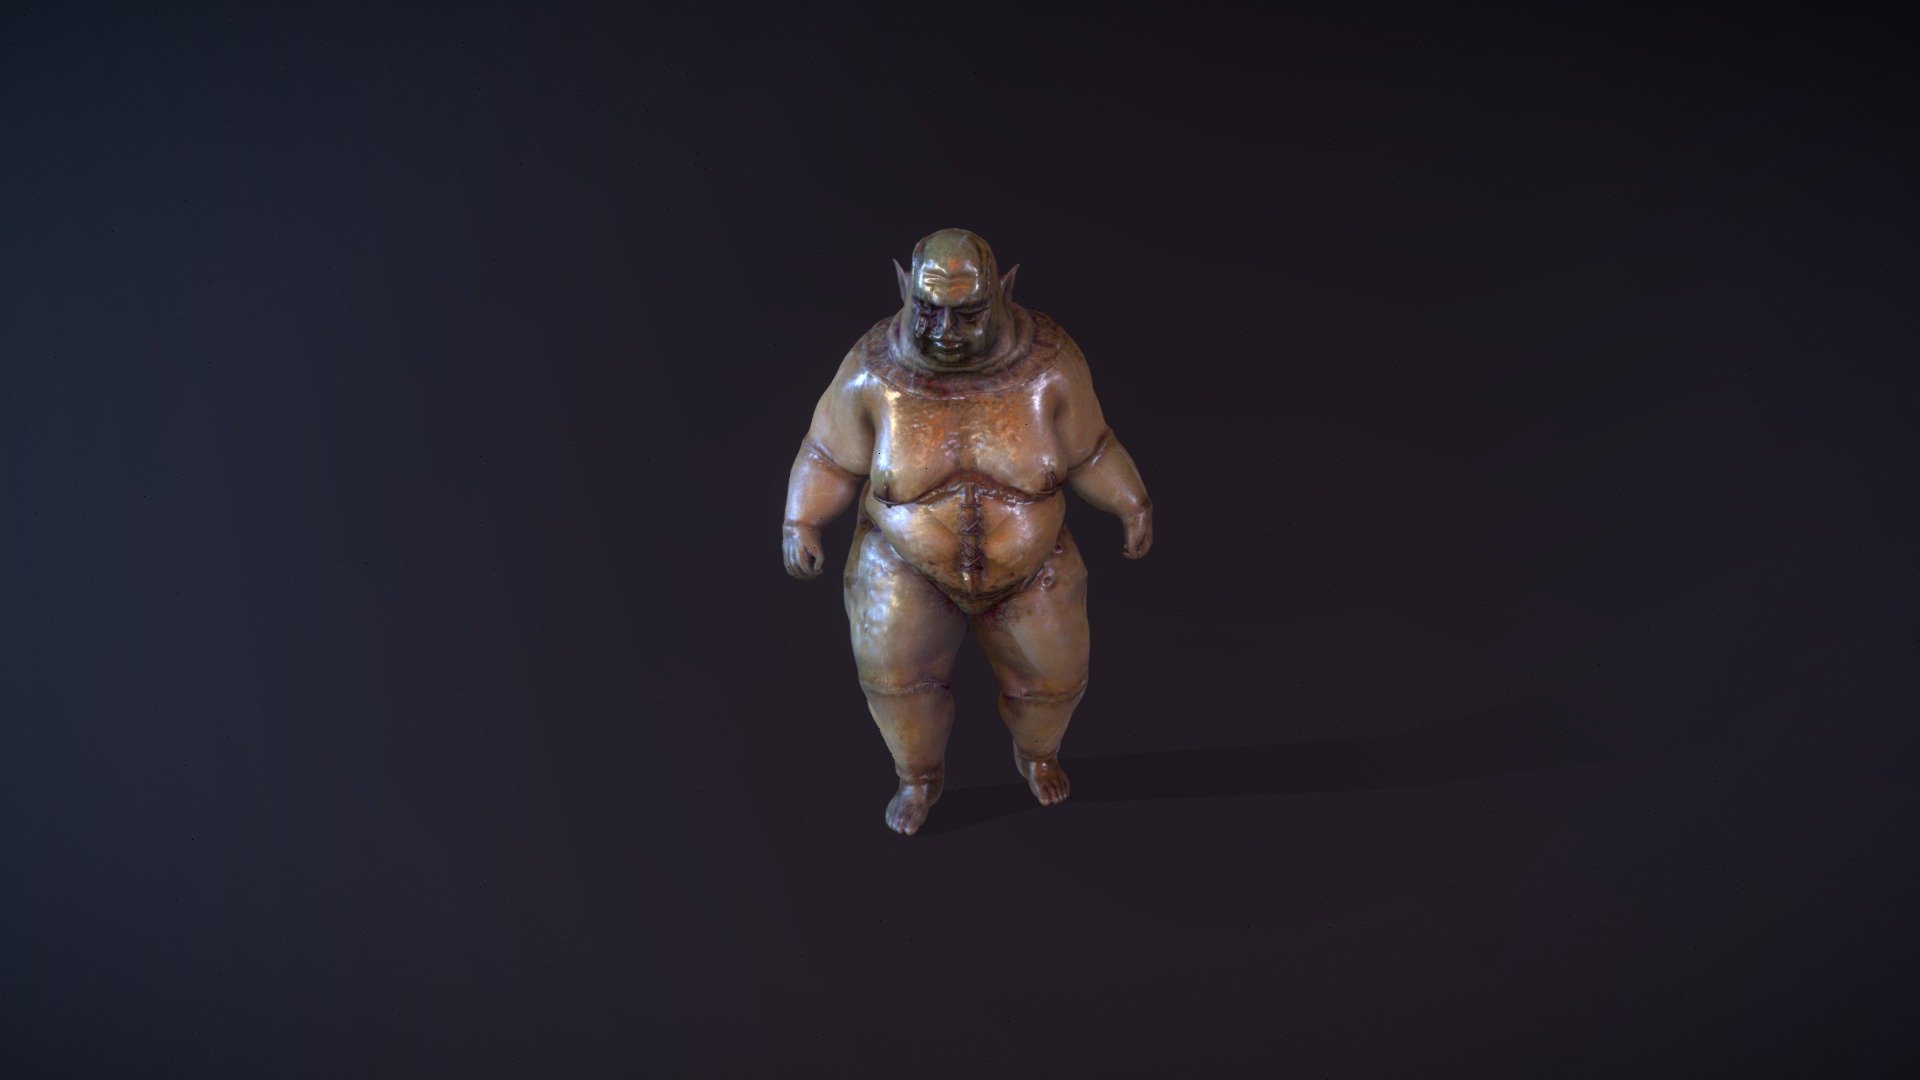 Problem with belly weighting was caused by sketchfab :/ - Horror Fat Monster - 3D model by sSamael 3d model